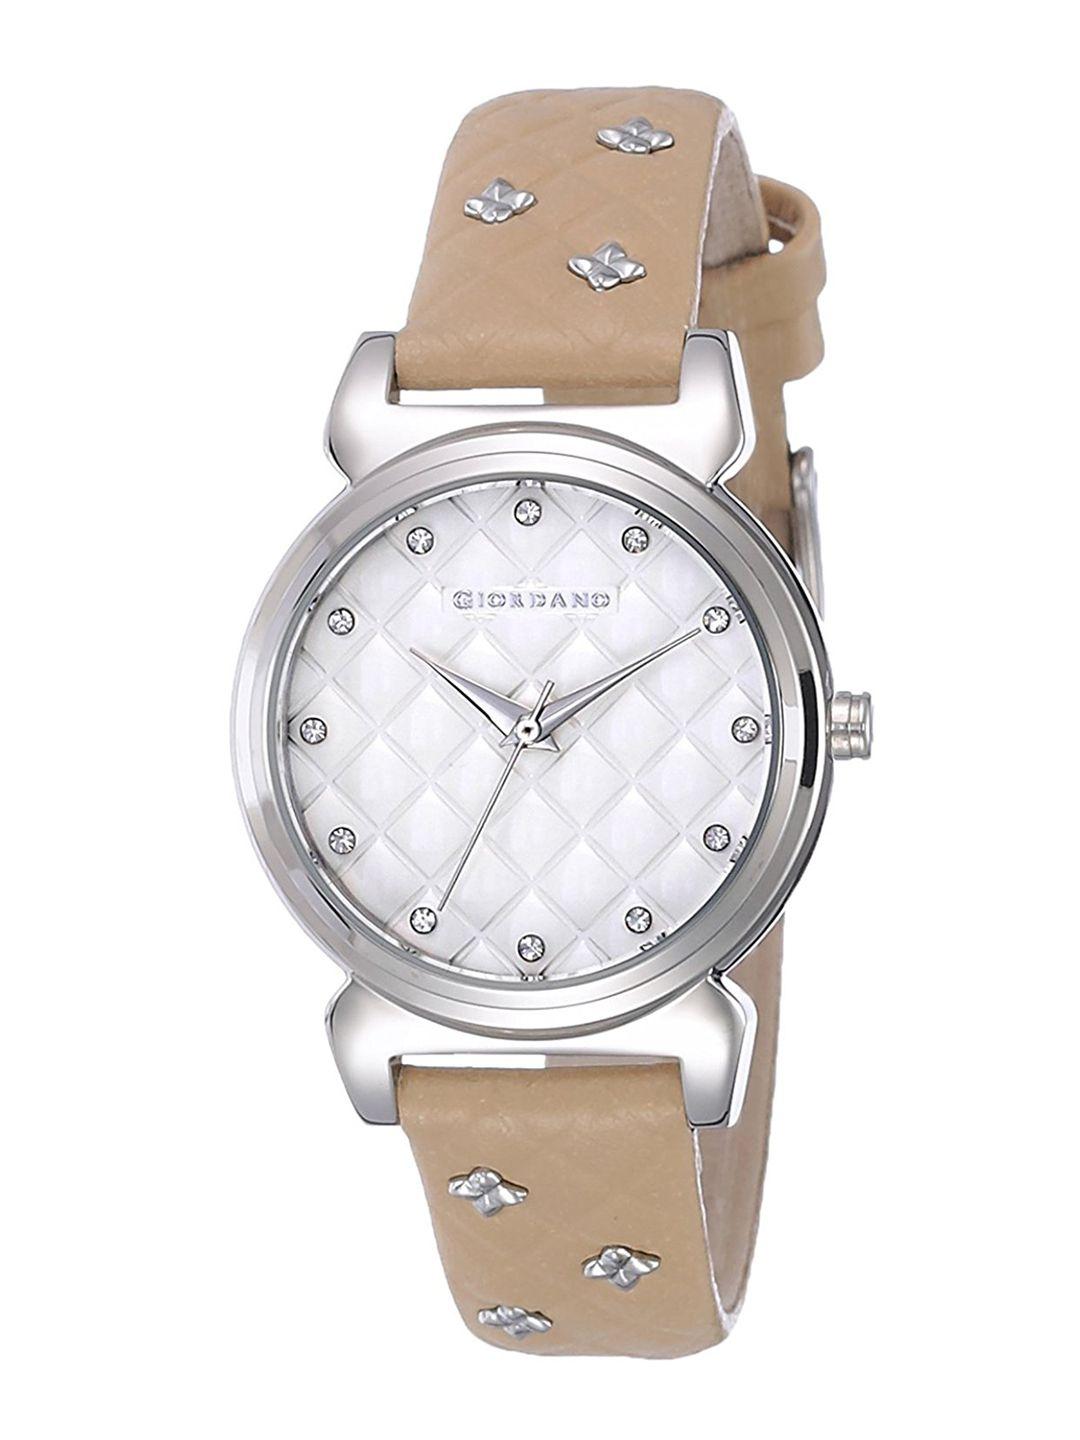 giordano-women--embellished-leather-straps-analogue-watch-2794-01